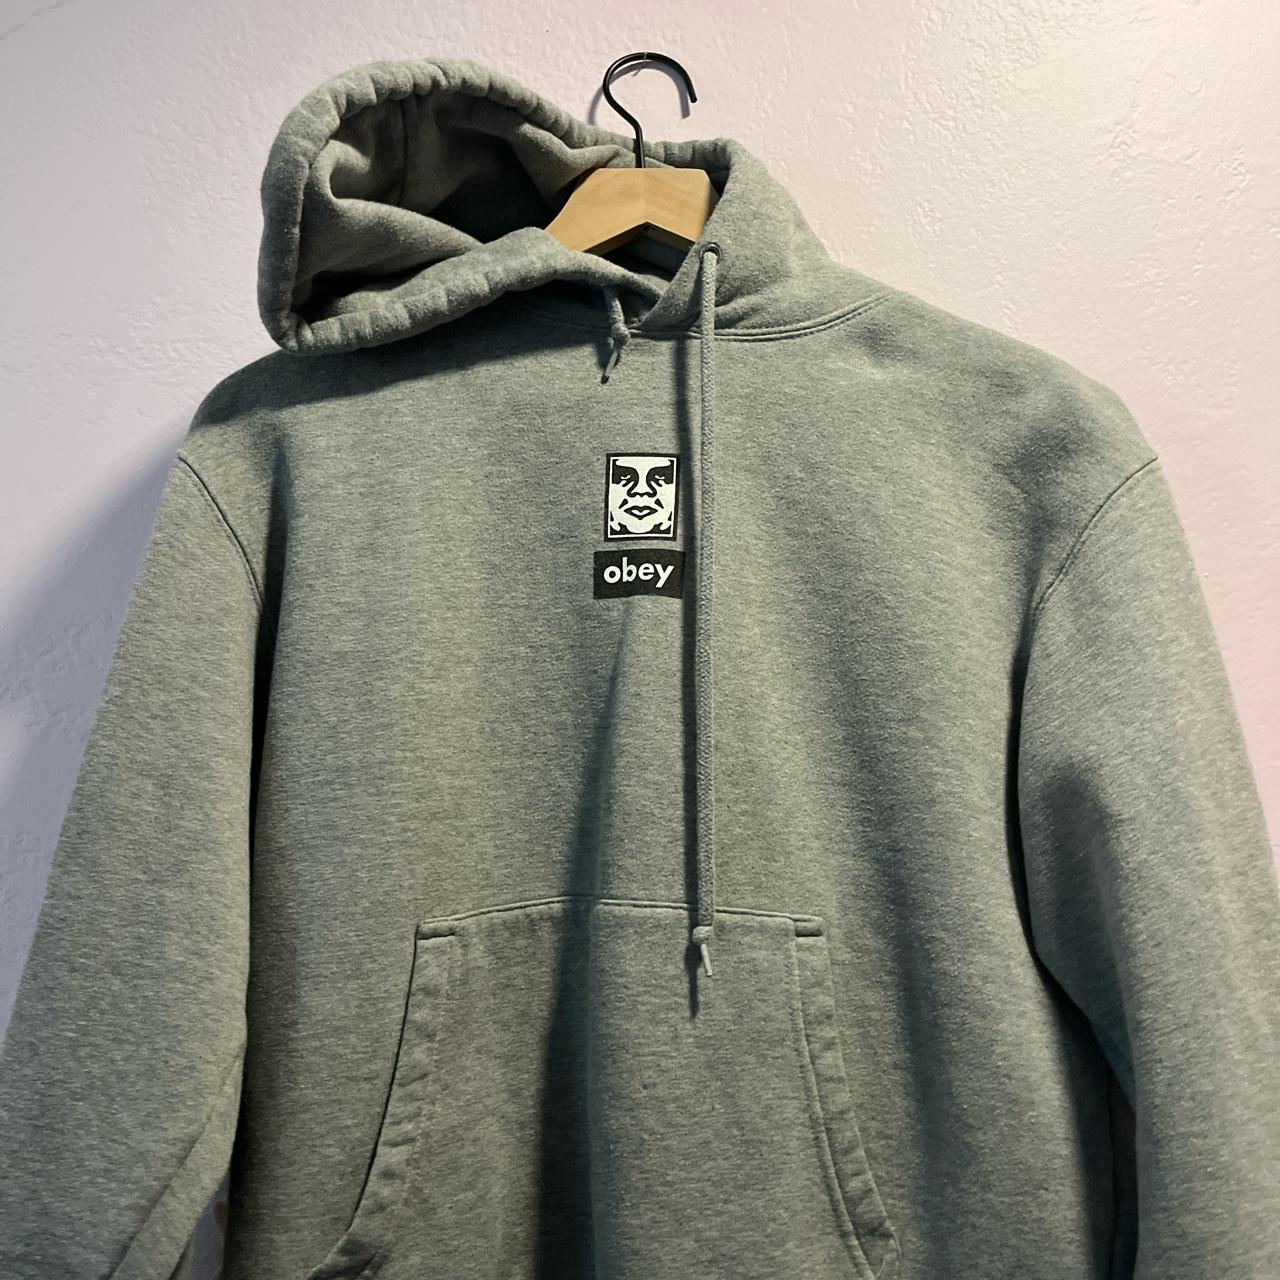 Obey Women's Grey and Black Hoodie